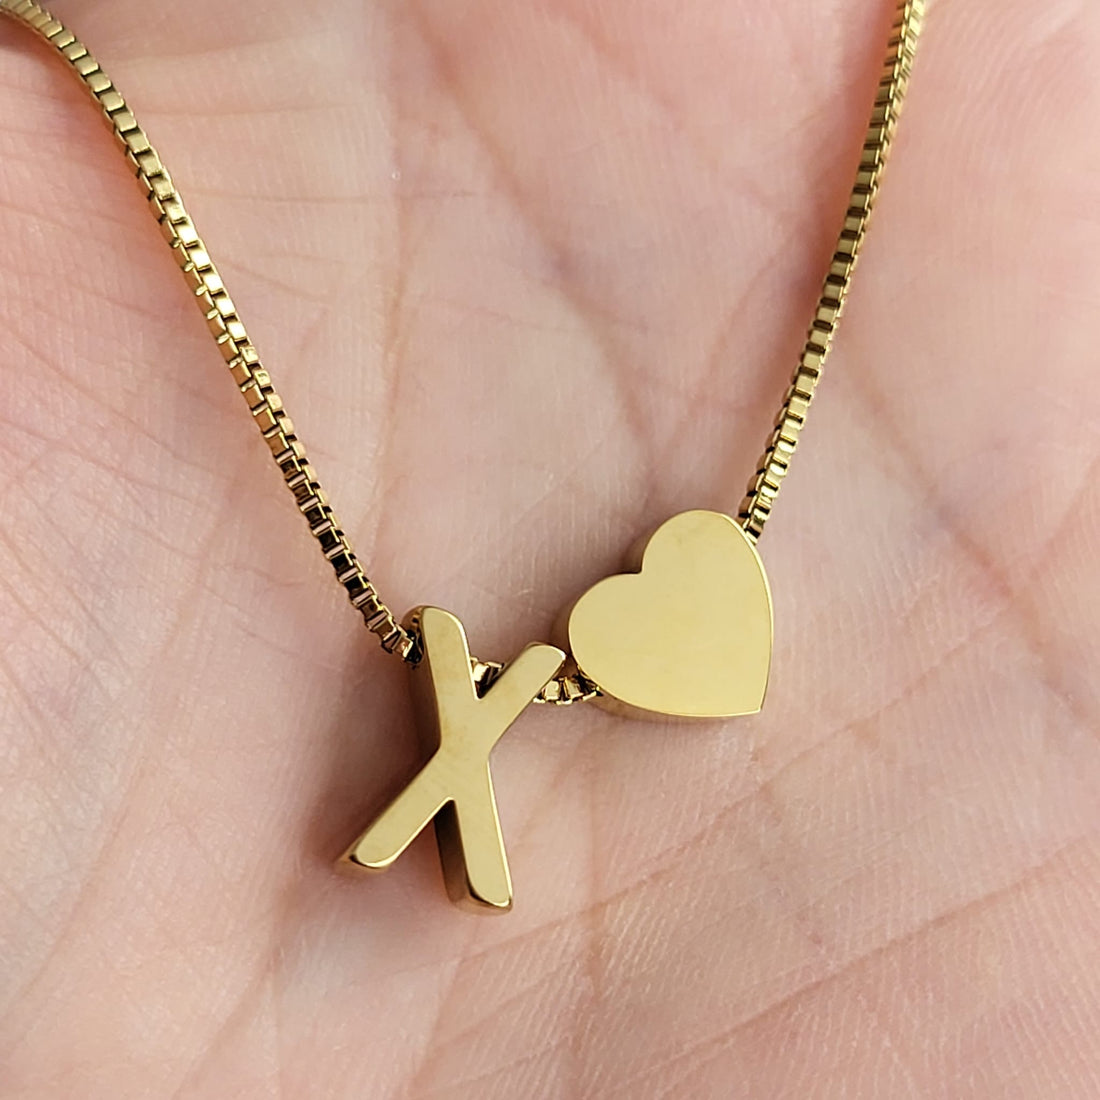 Necklace Initials Love - X